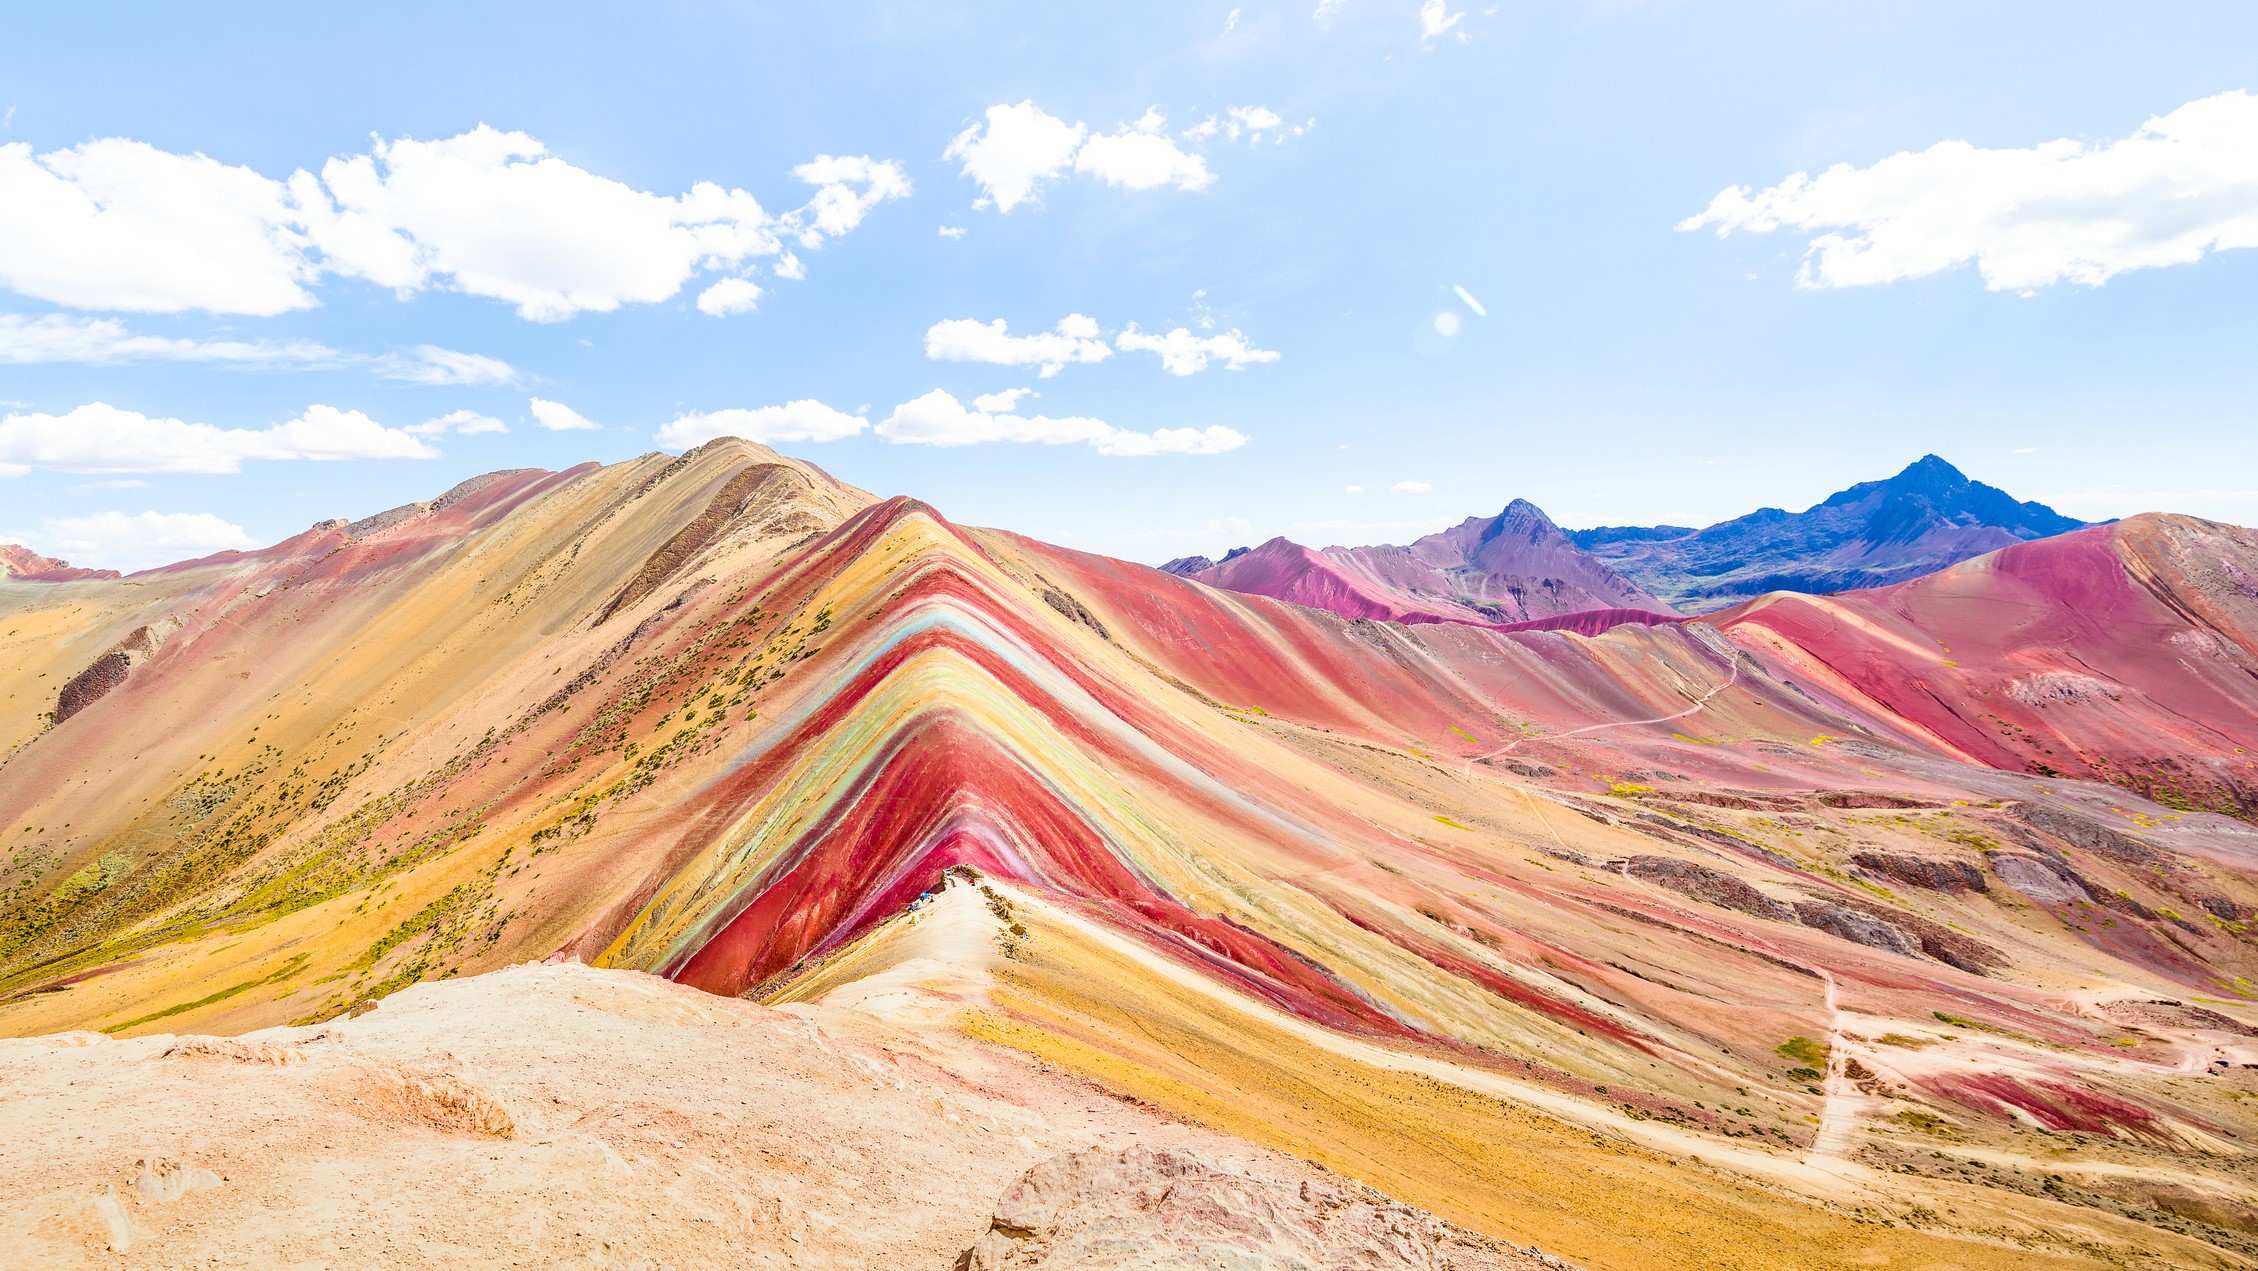 Colourful striped mountain. Orange, red and yellow stripes show the distinct layers of the sedimentary deposits.